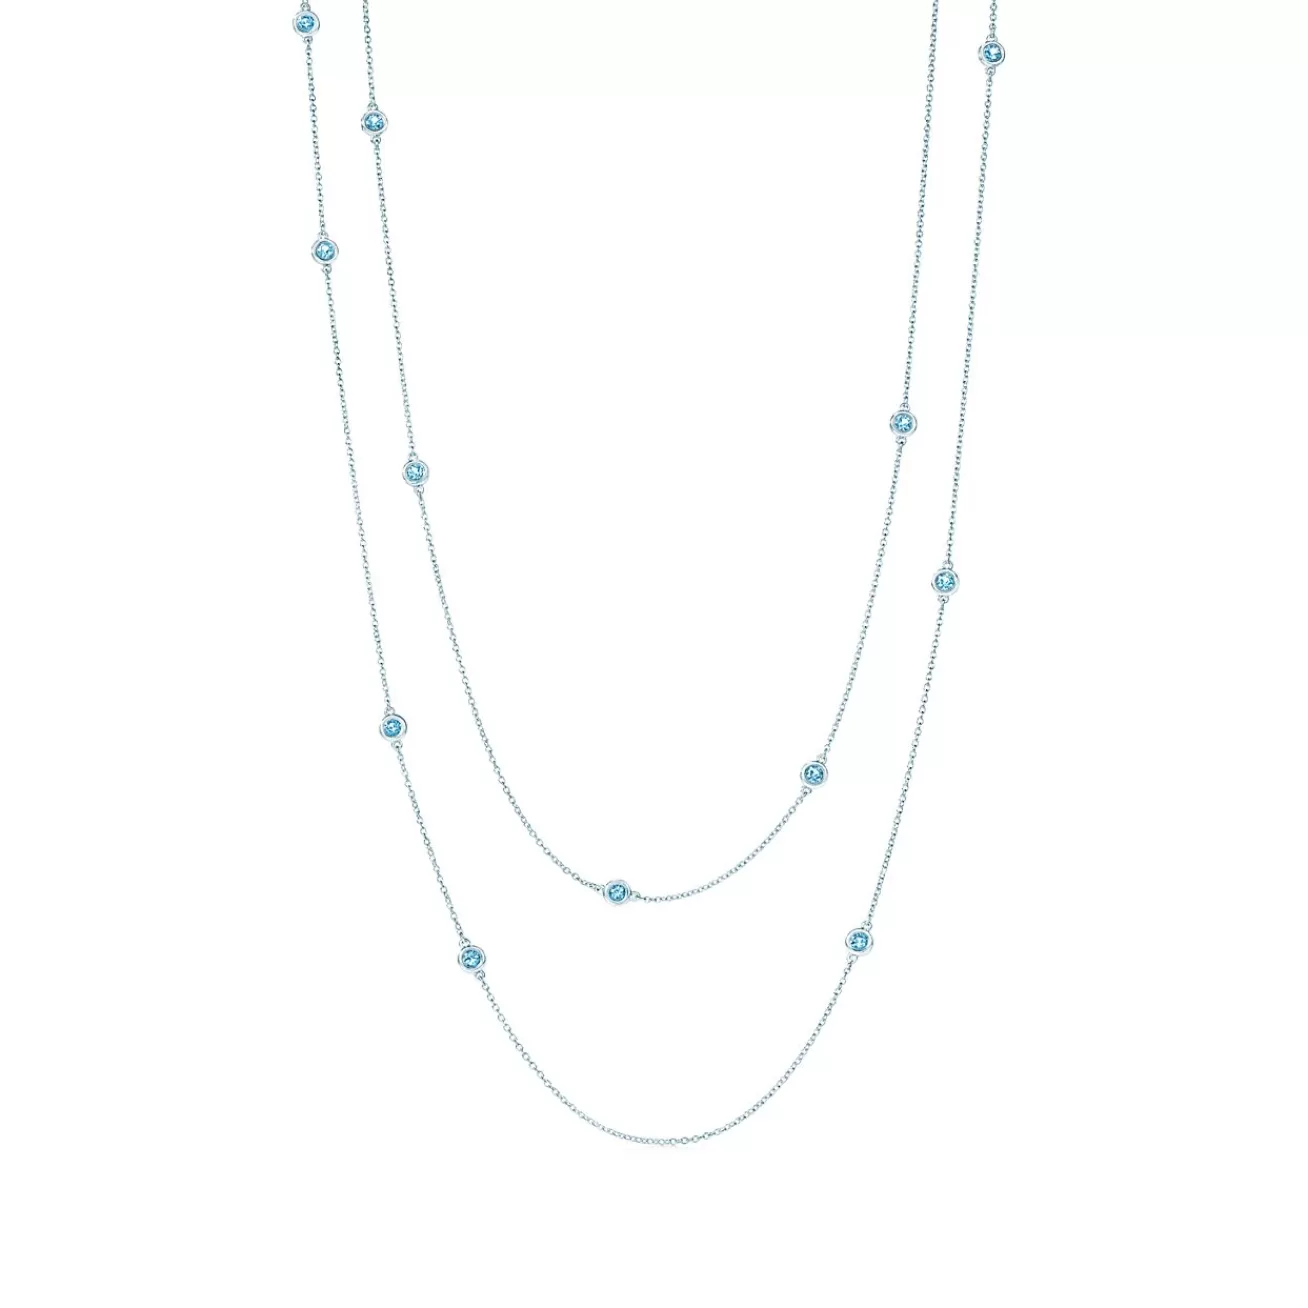 Tiffany & Co. Elsa Peretti® Color by the Yard sprinkle necklace in silver with aquamarines. | ^ Necklaces & Pendants | Sterling Silver Jewelry